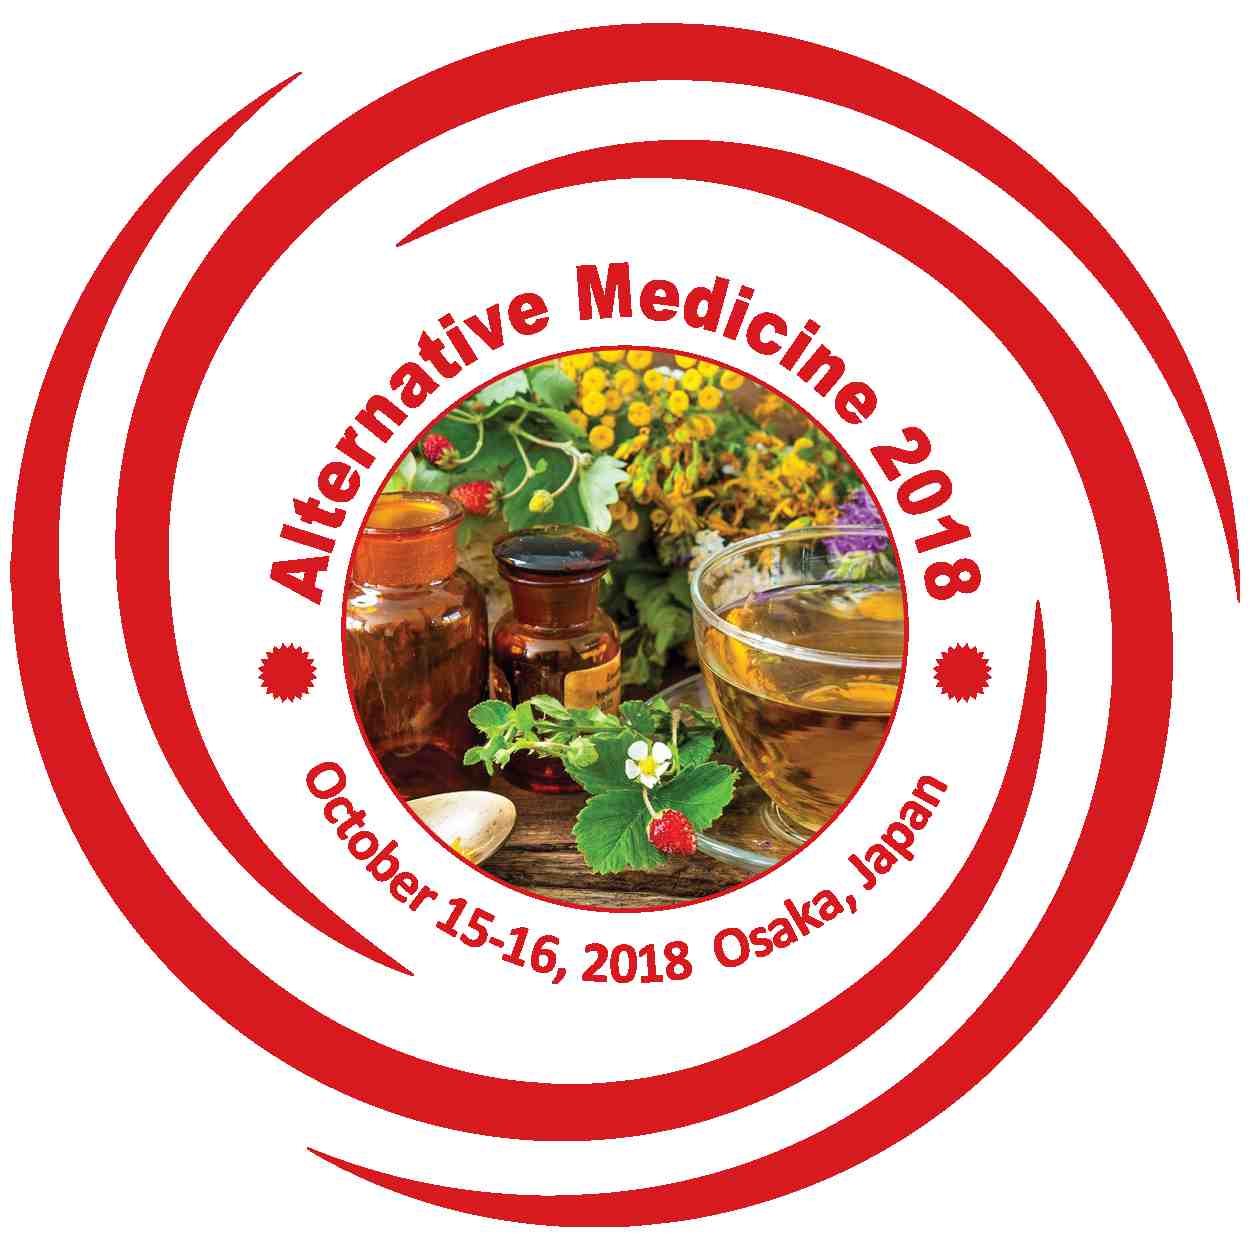 10th International Conference on Herbals, Alternative & Traditional Medicine